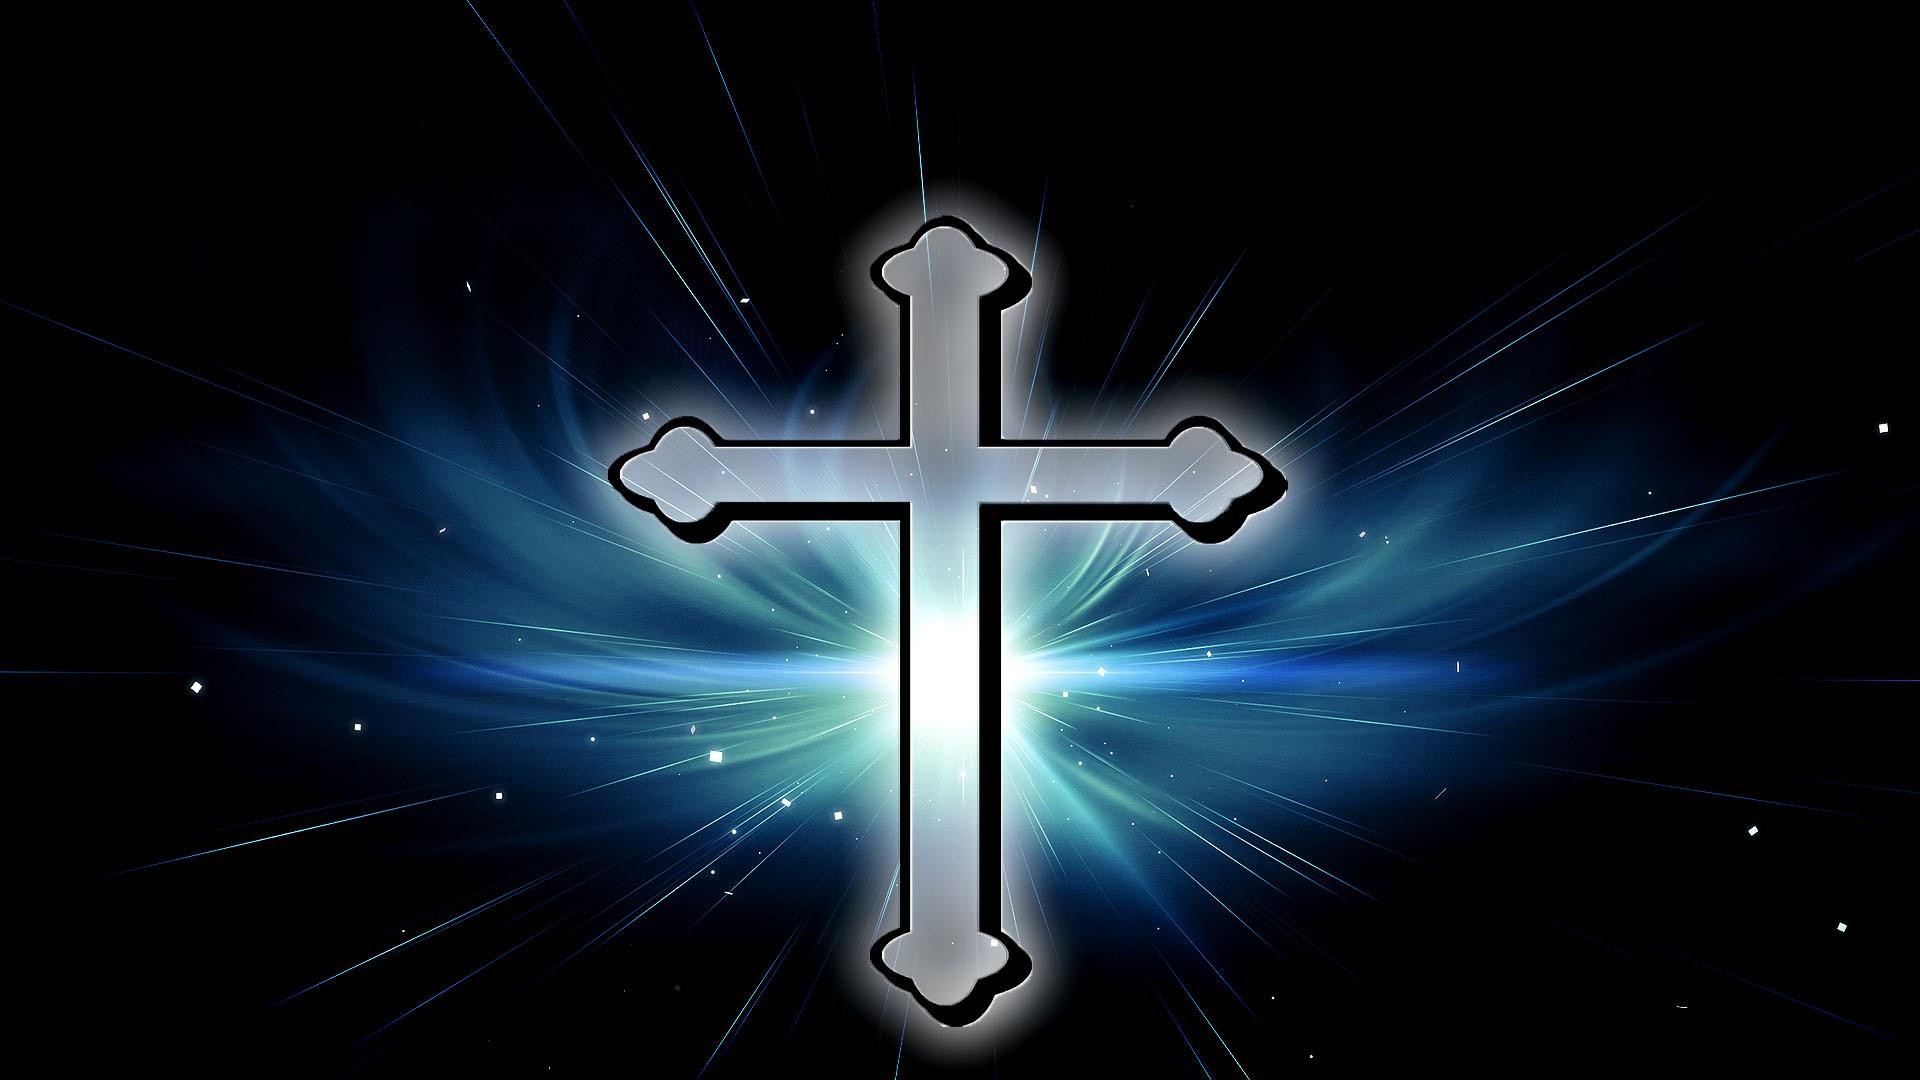 1920x1080 Cool Cross Wallpapers 53 images Source Â· Awesome Cross Background Cross  Wallpapers